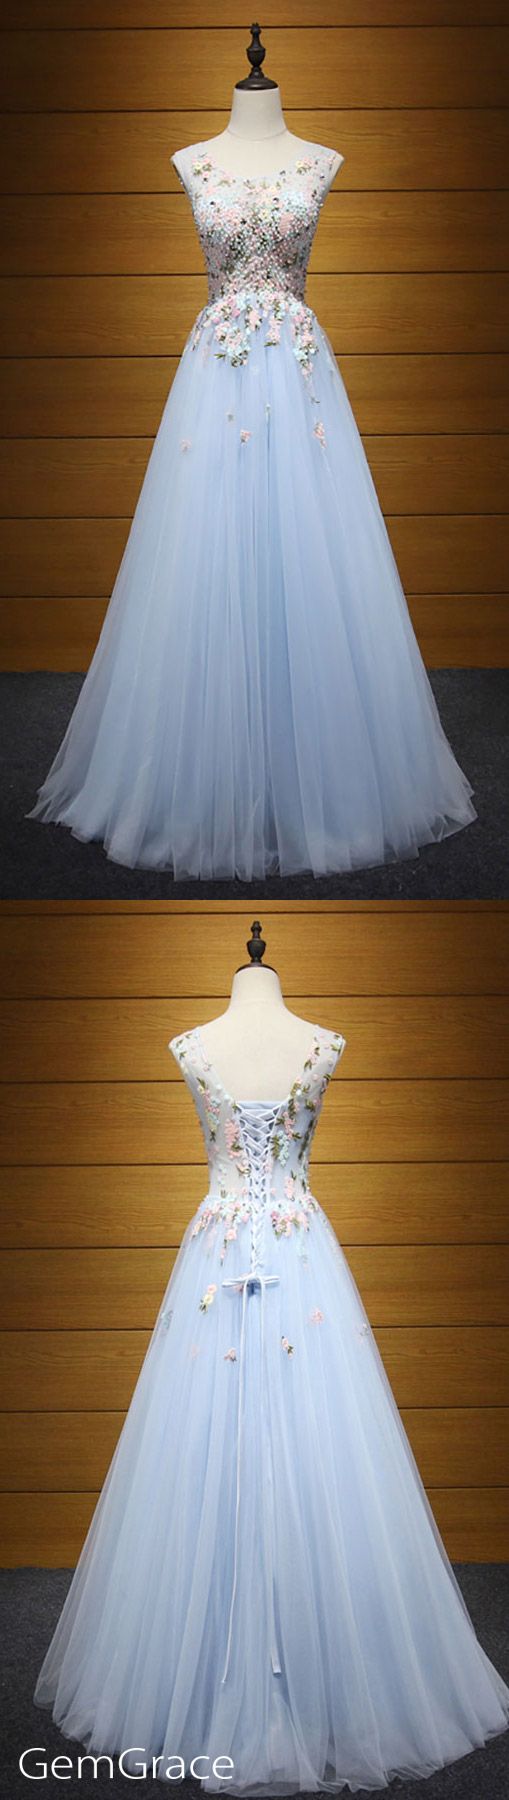 Exquisite Ball-gown, V-neck, Floor-length ,tulle Prom Dress With Beading, Evening Dress, Chiffon Prom Gown , Evening Gowns